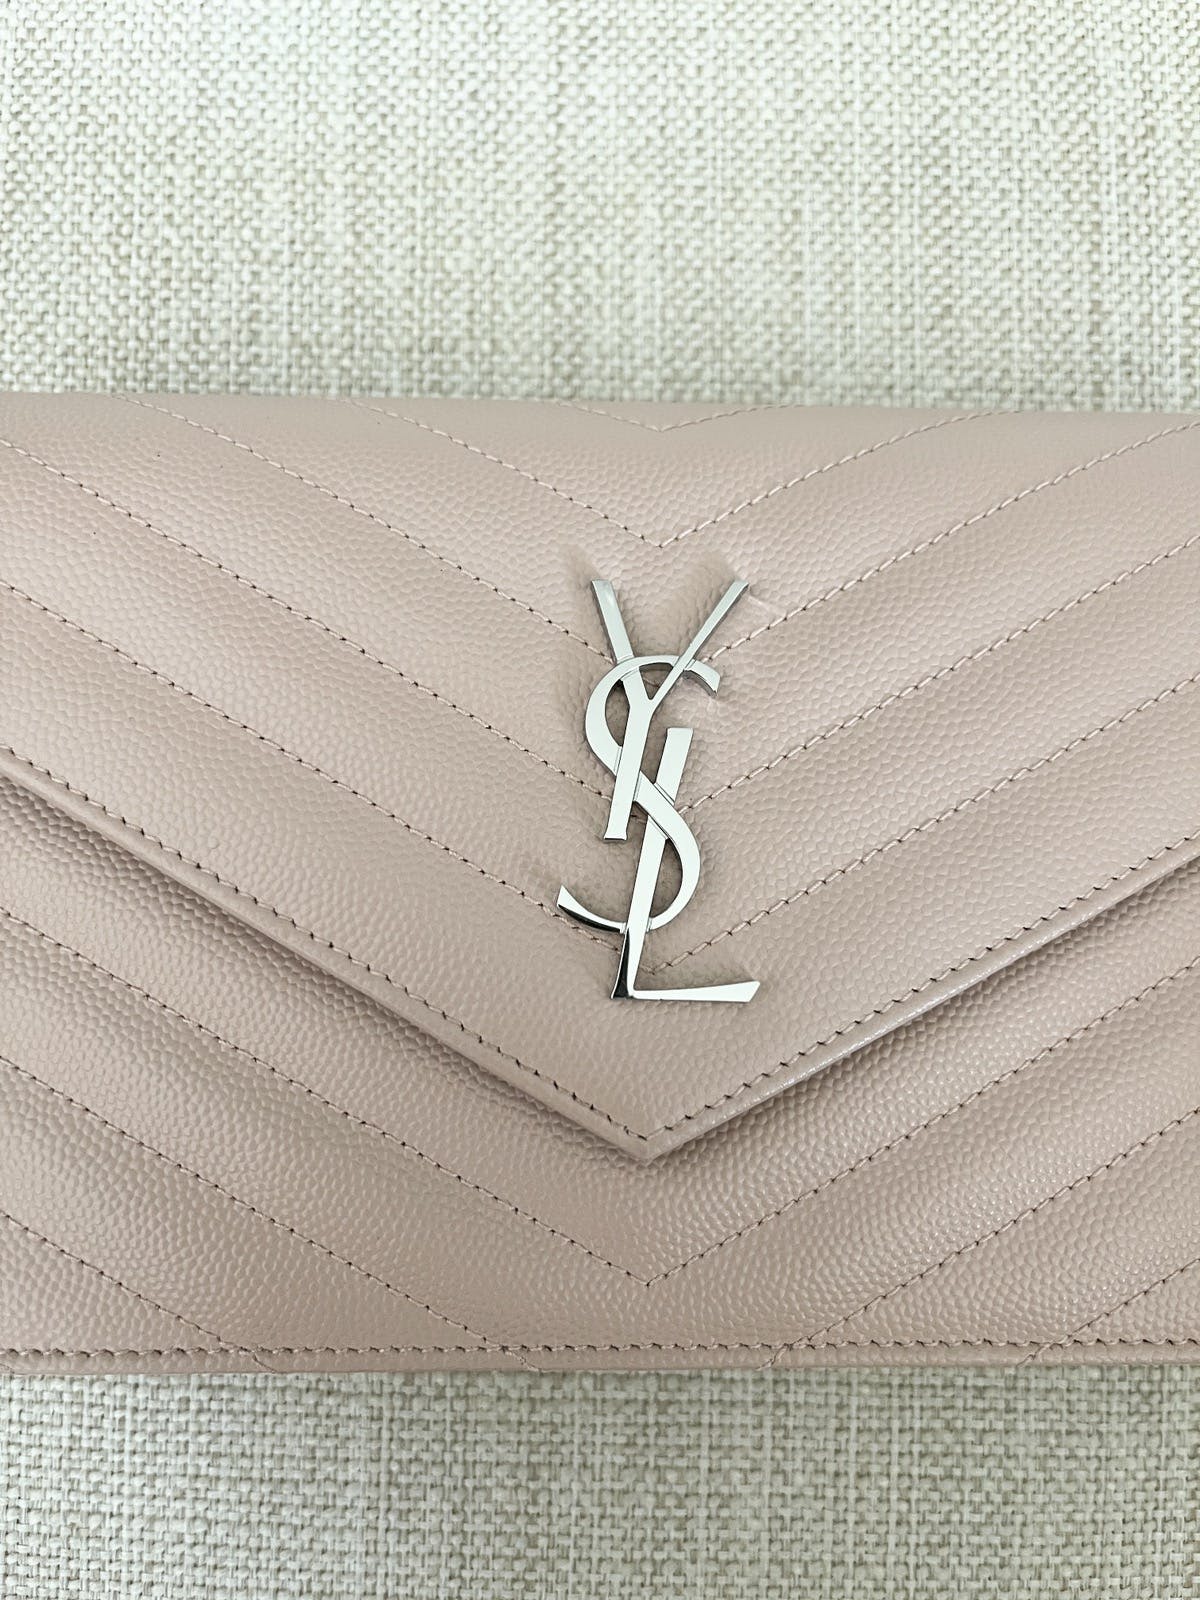 Yves Saint Laurent Bags Ysl Caviar Wallet On Chain In Nude - 3